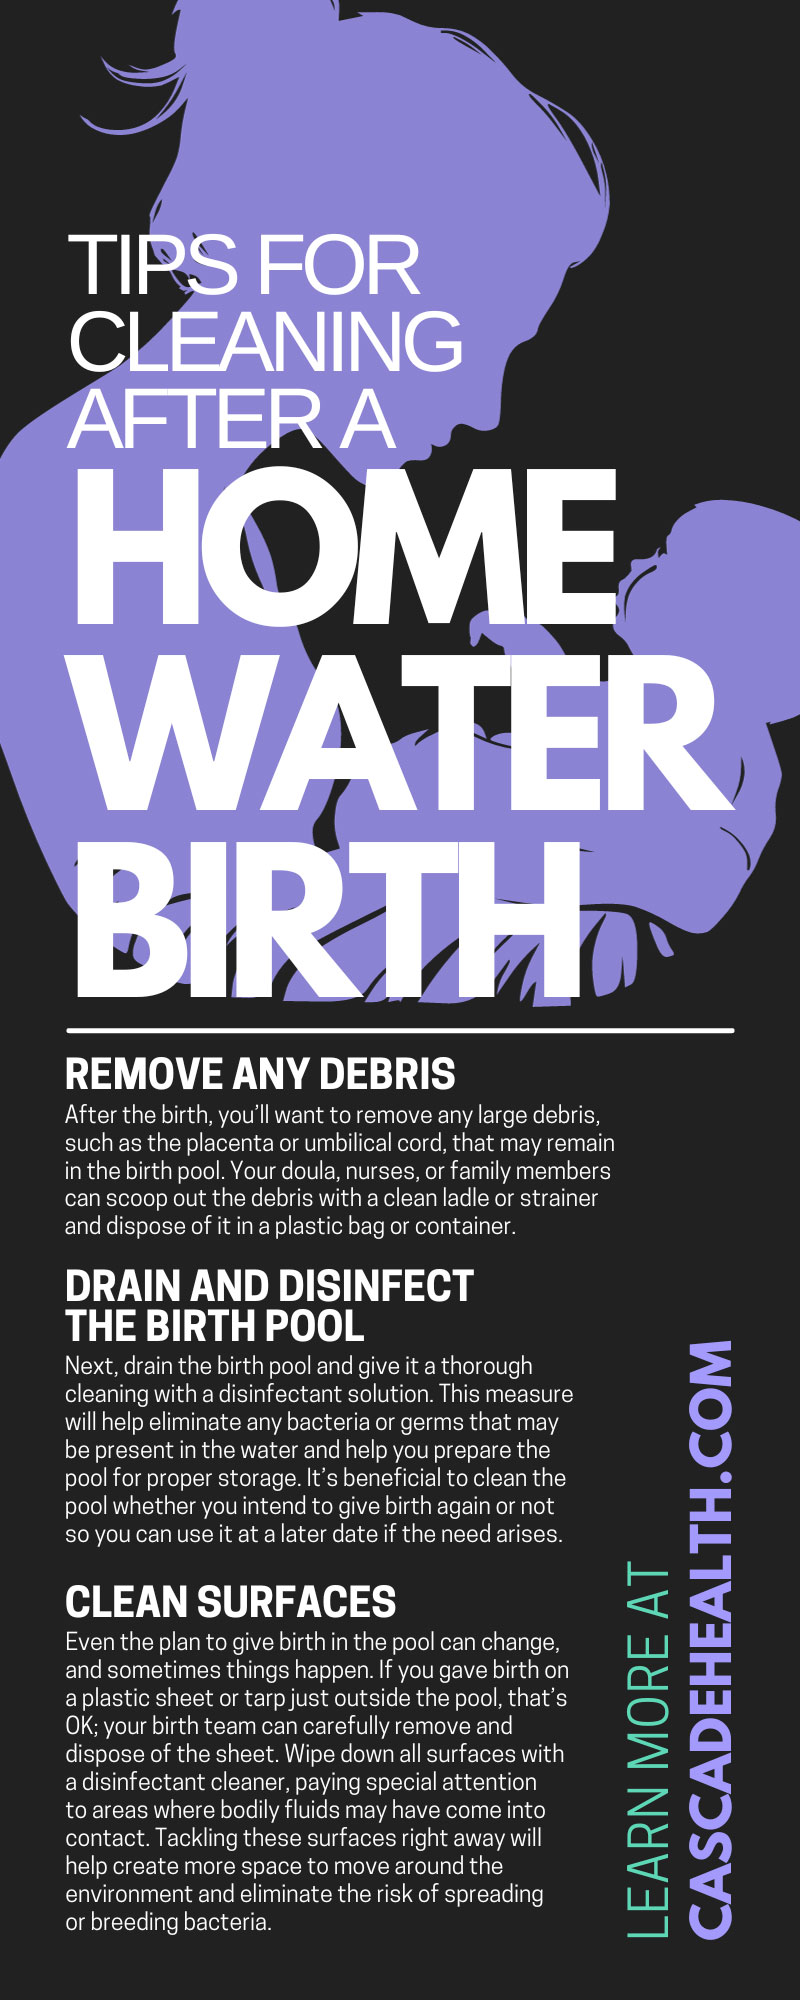 Tips for Cleaning After a Home Water Birth